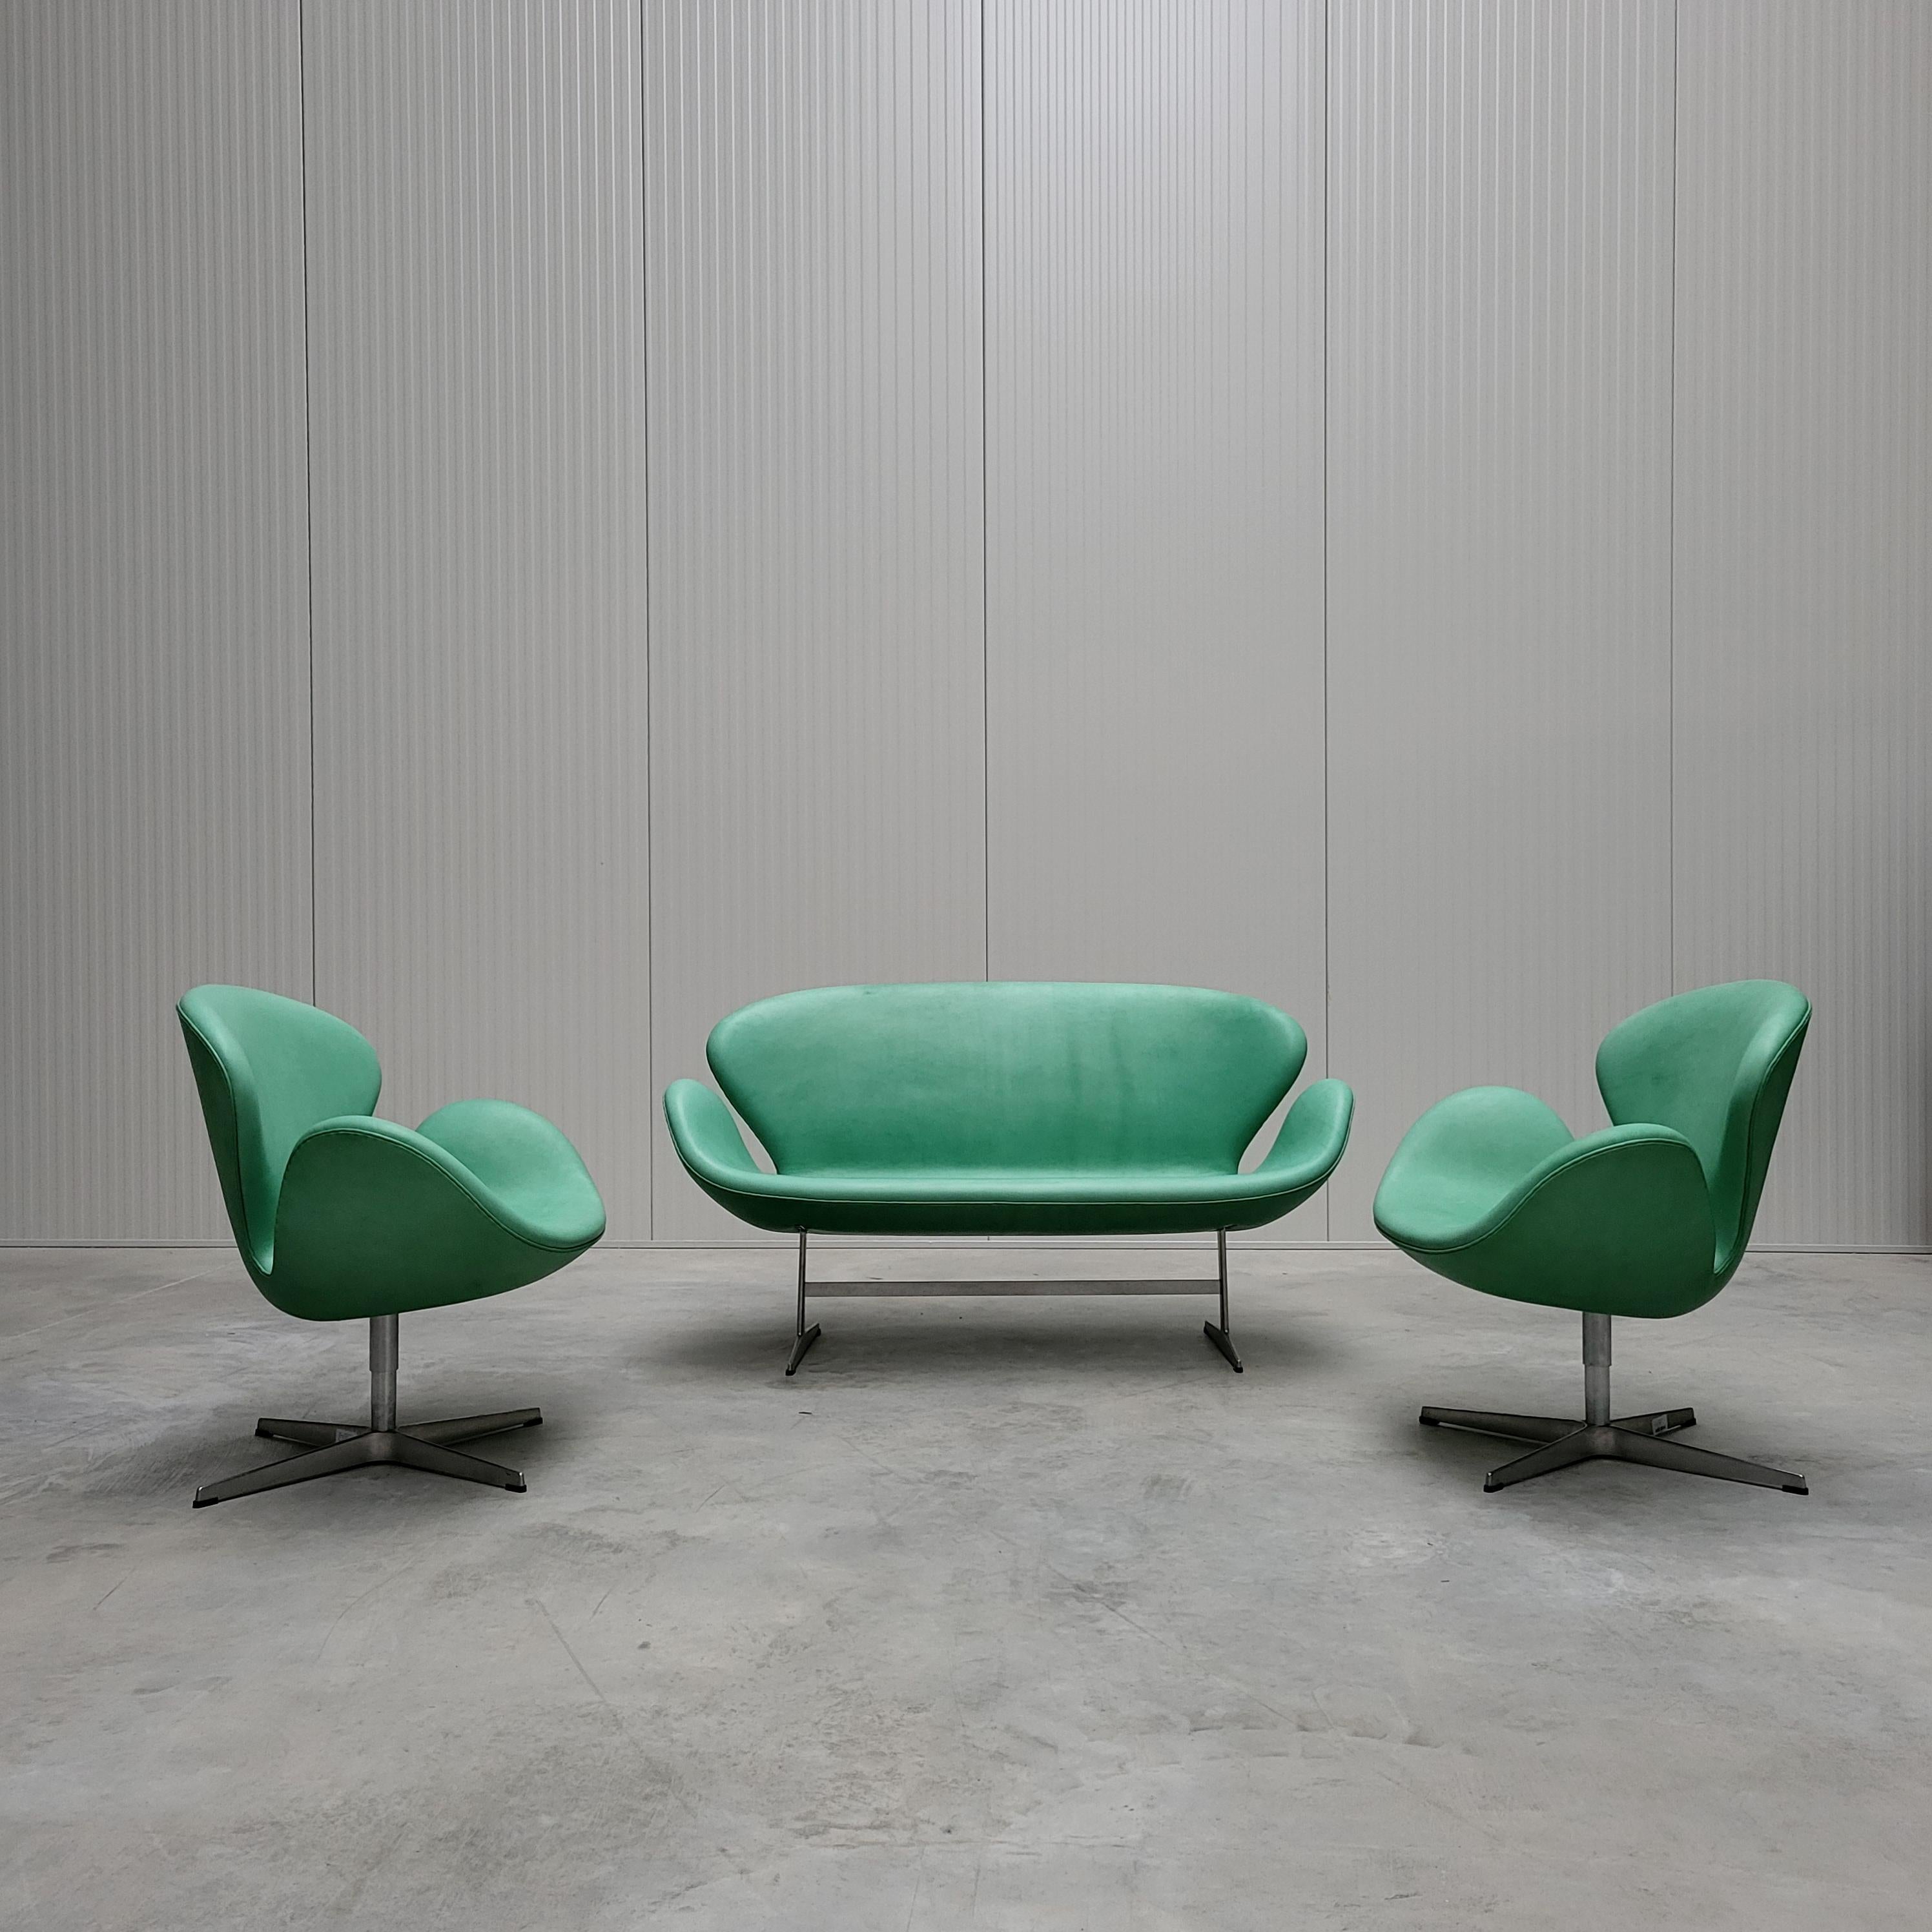 This wonderful living room set with a Swan Sofa and 2x Swan chairs were designed in the 1950s by Arne Jacobsen for the SAS Hotel in Copenhagen and produced by Fritz Hansen in 2006. 

The Swan set features an amazing and custom made Mint Green